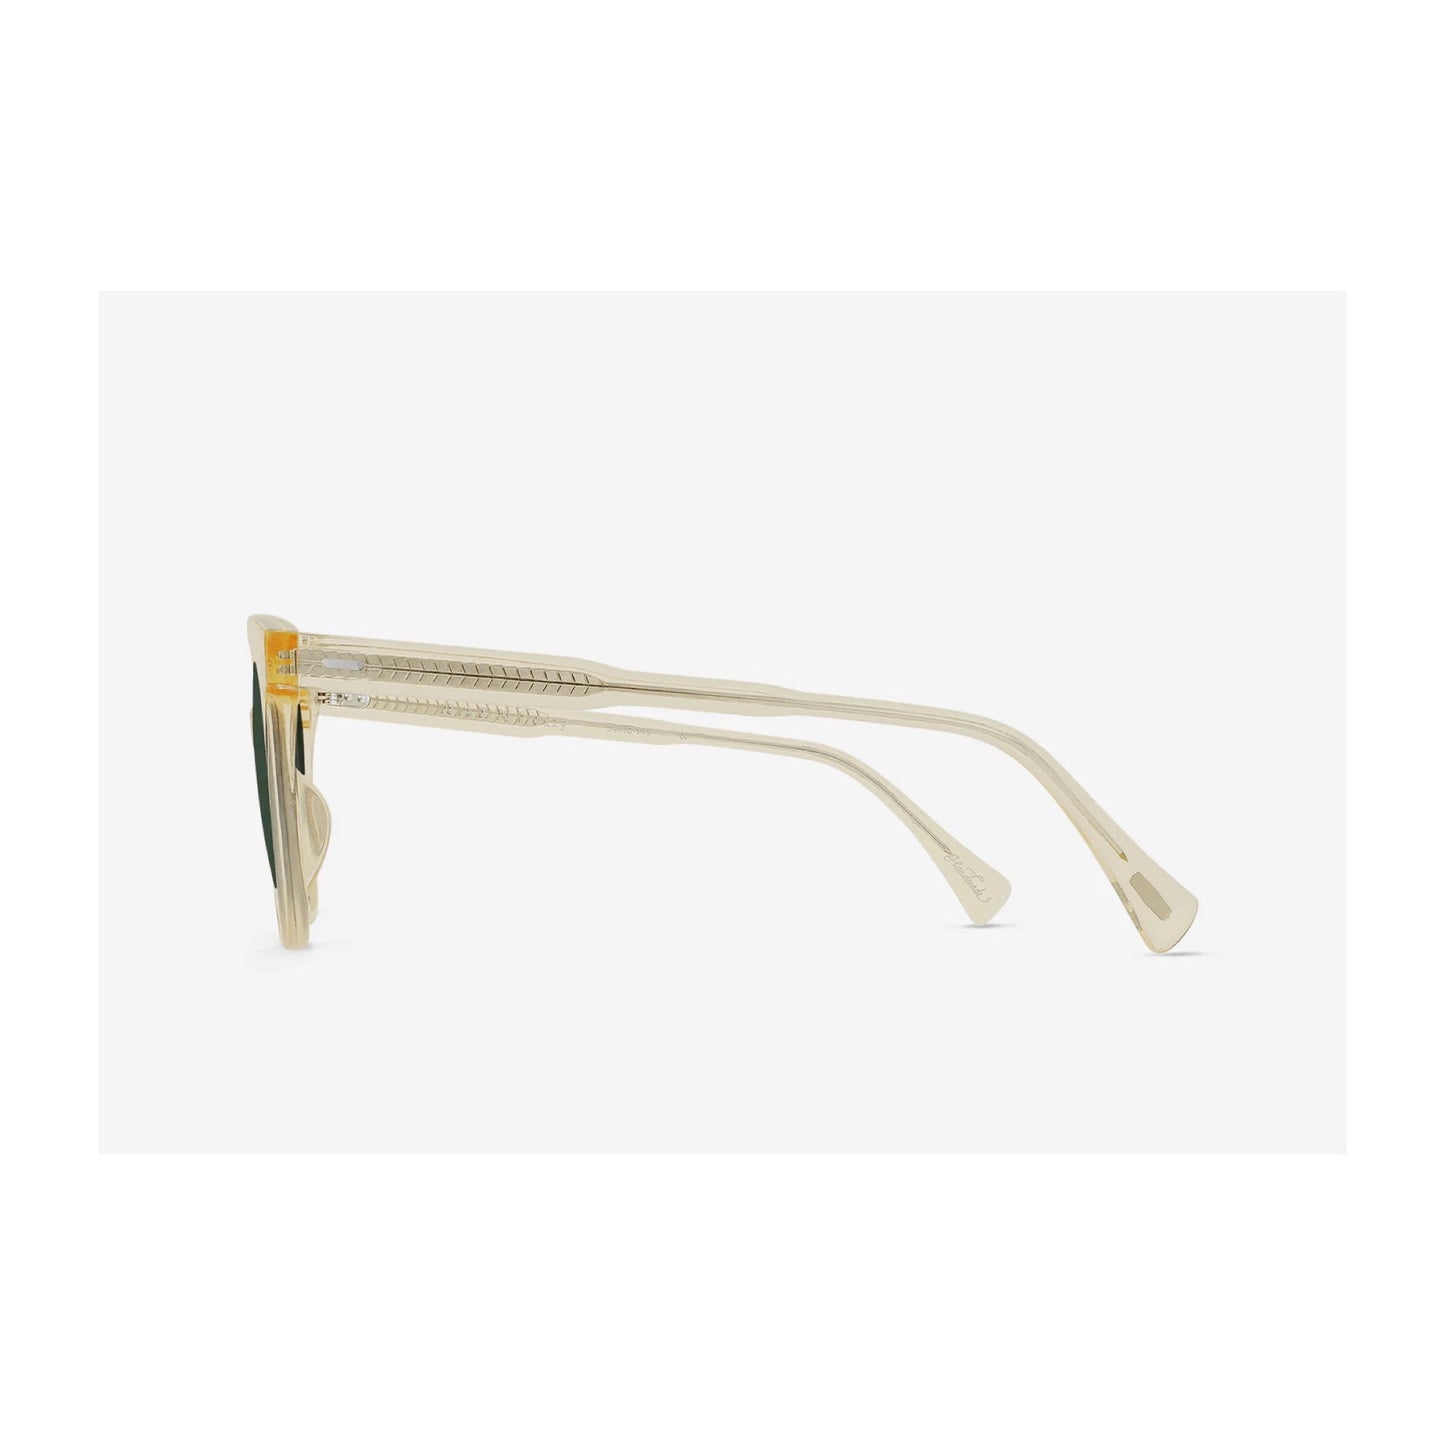 RAEN / lily - champagne crystal - polarized